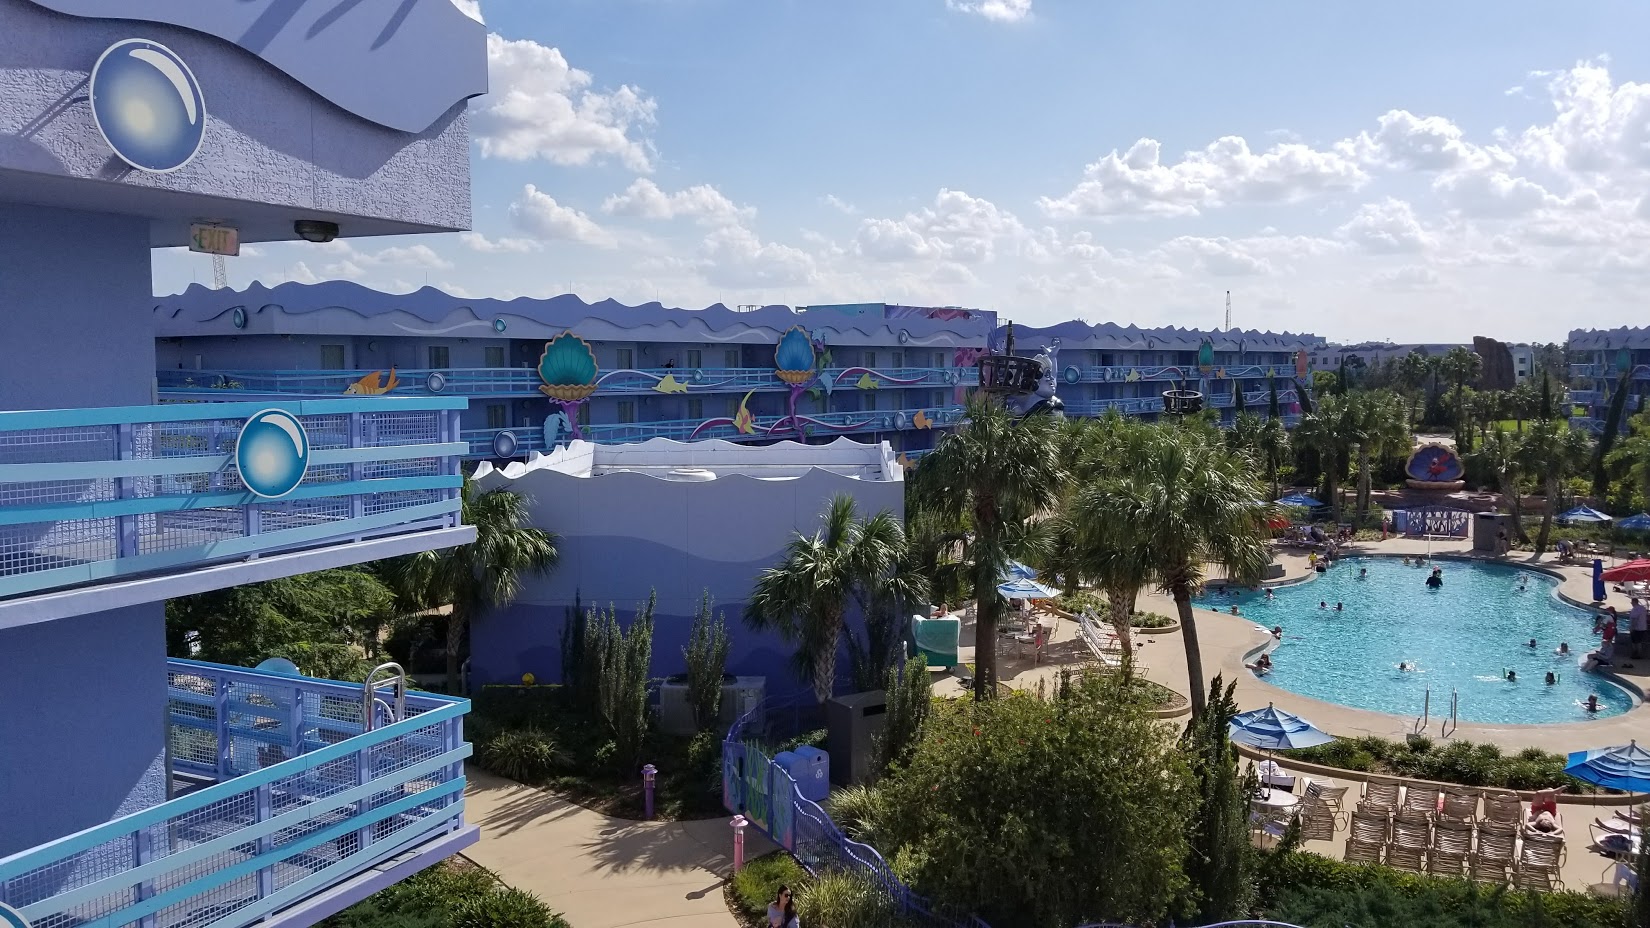 Annual Passholders: New Disney World Spring Room Discount Just Released